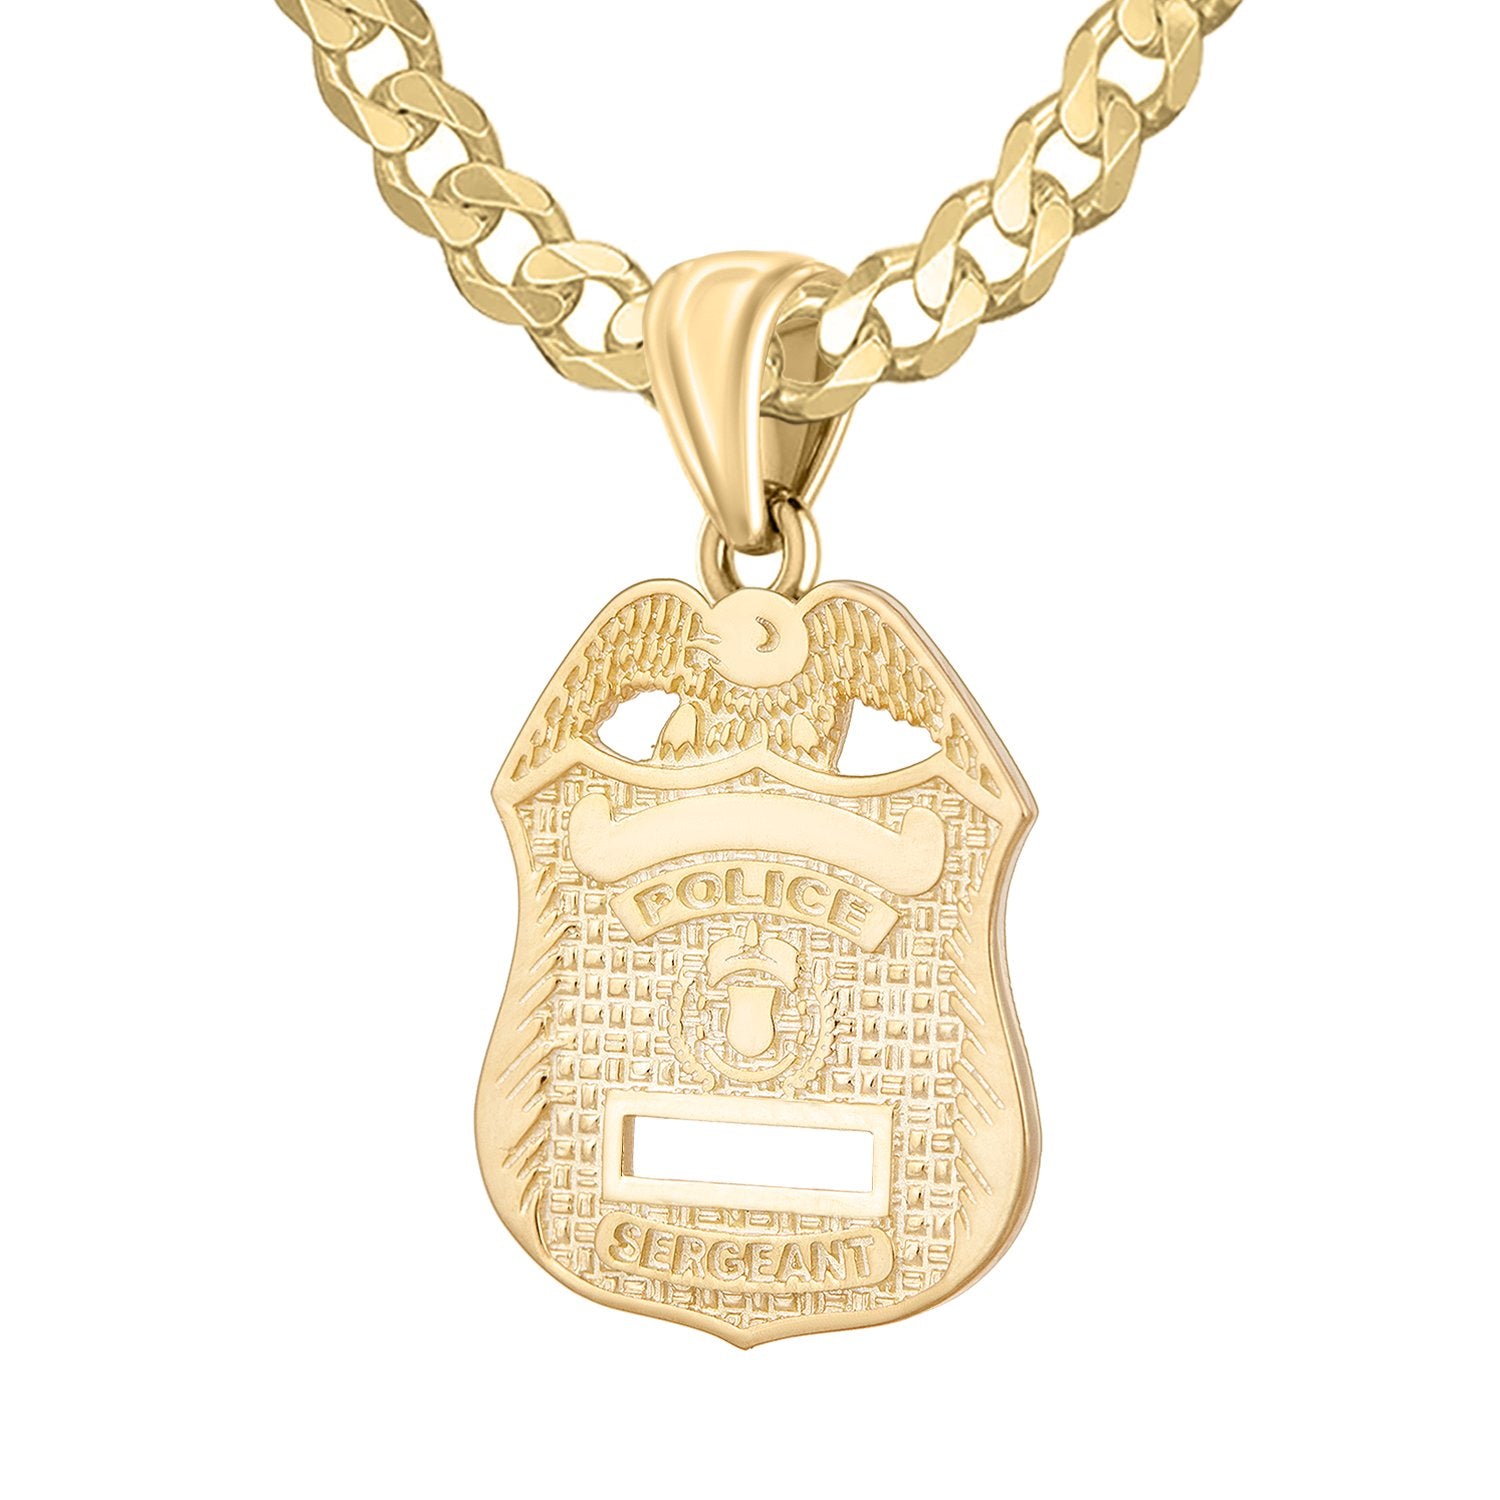 Police Badge Necklace In Gold For Men - 4.6mm Curb Chain